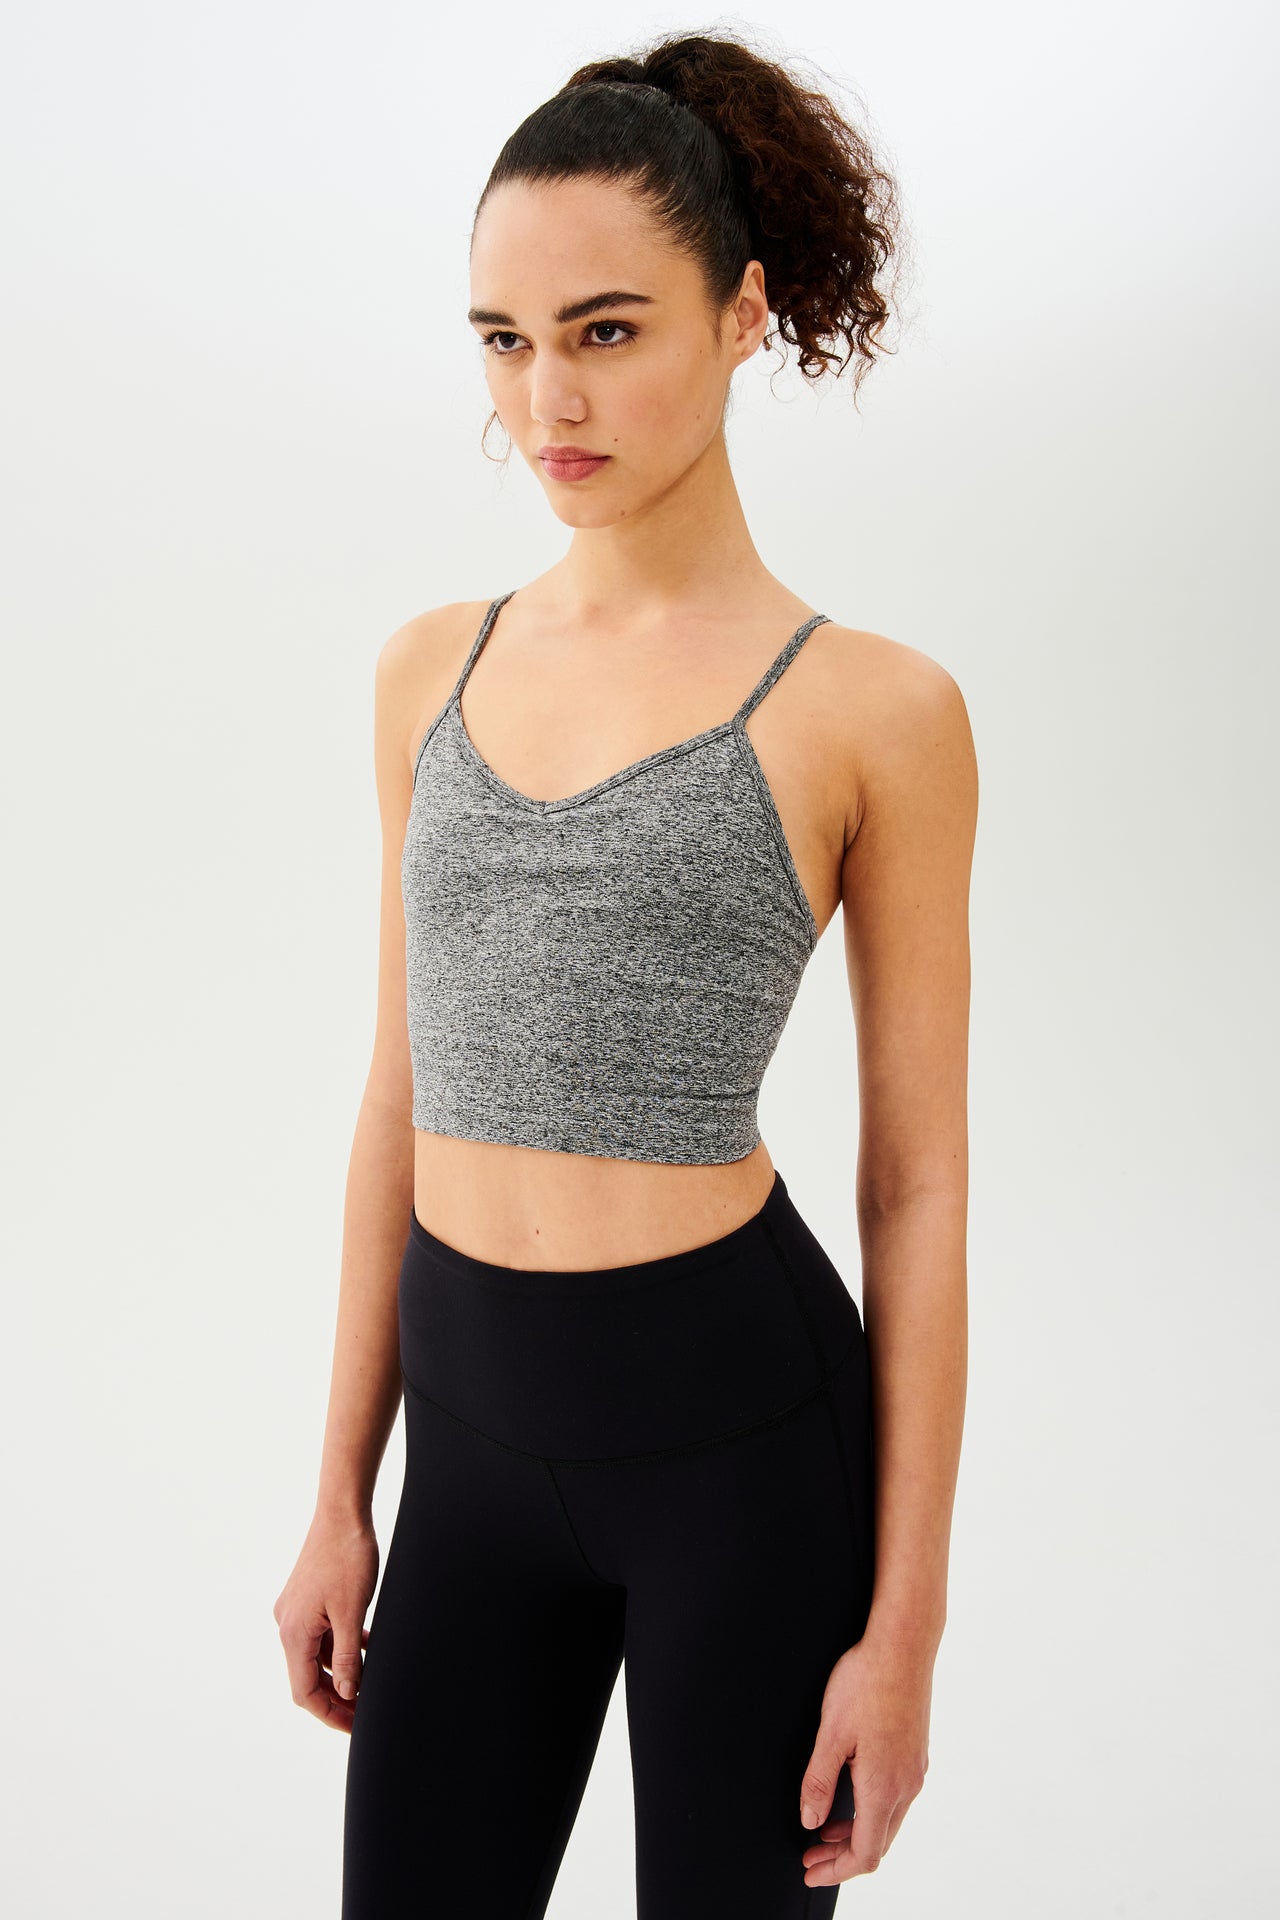 A woman wearing a Splits59 Loren Seamless Cami in Heather Grey with a built-in shelf bra and black leggings.